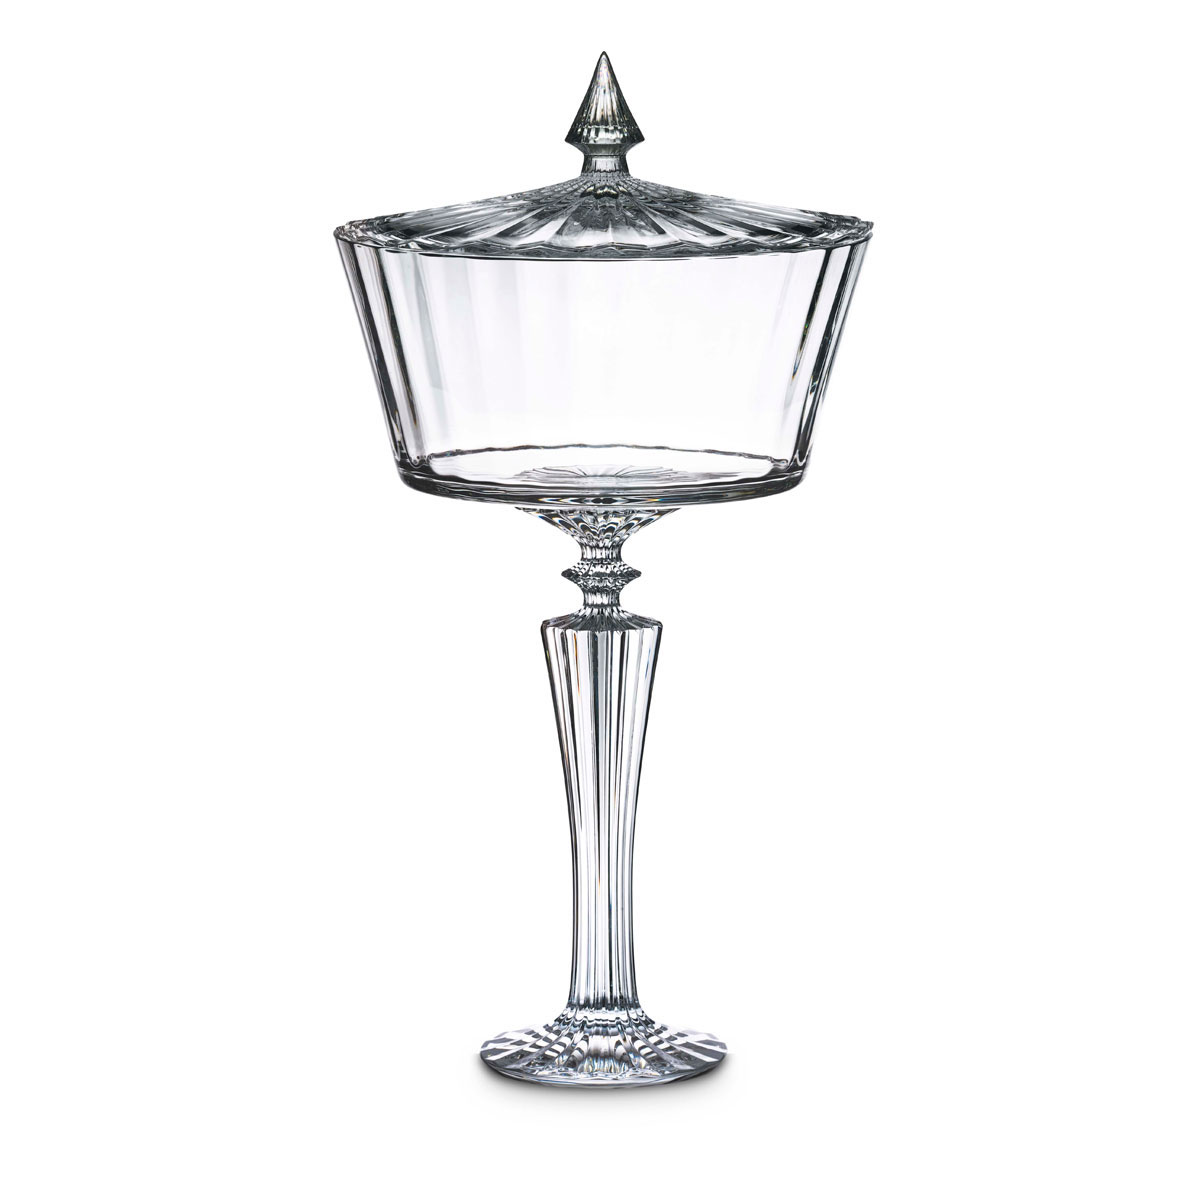 Baccarat Crystal, Mille Nuits Candy Box, Tall